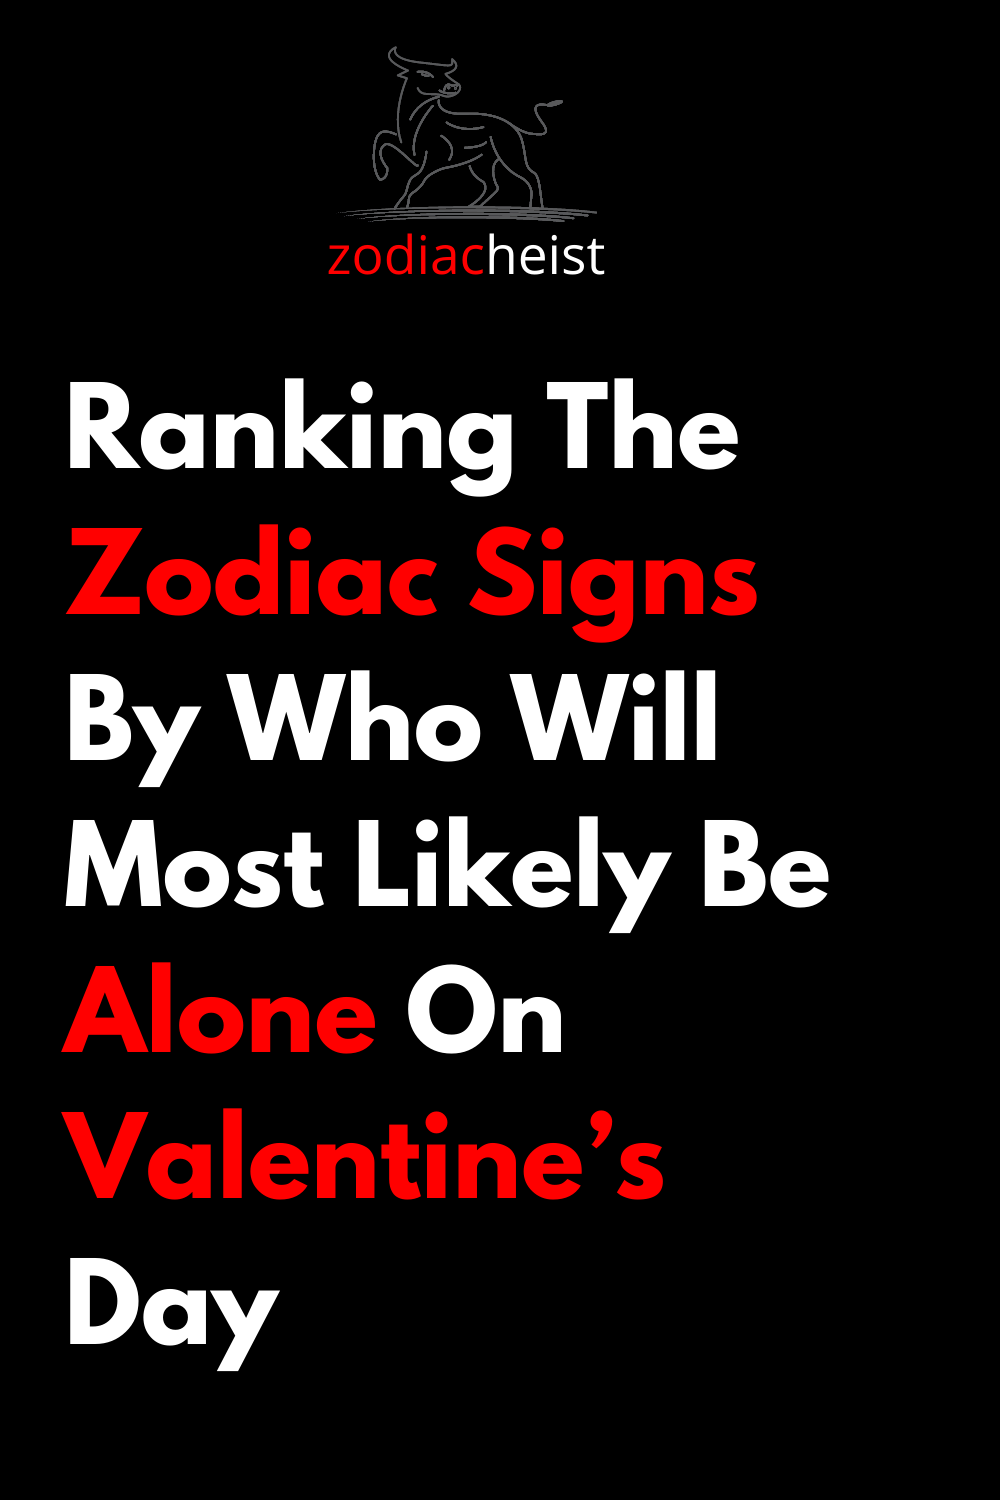 Ranking The Zodiac Signs By Who Will Most Likely Be Alone On Valentine’s Day